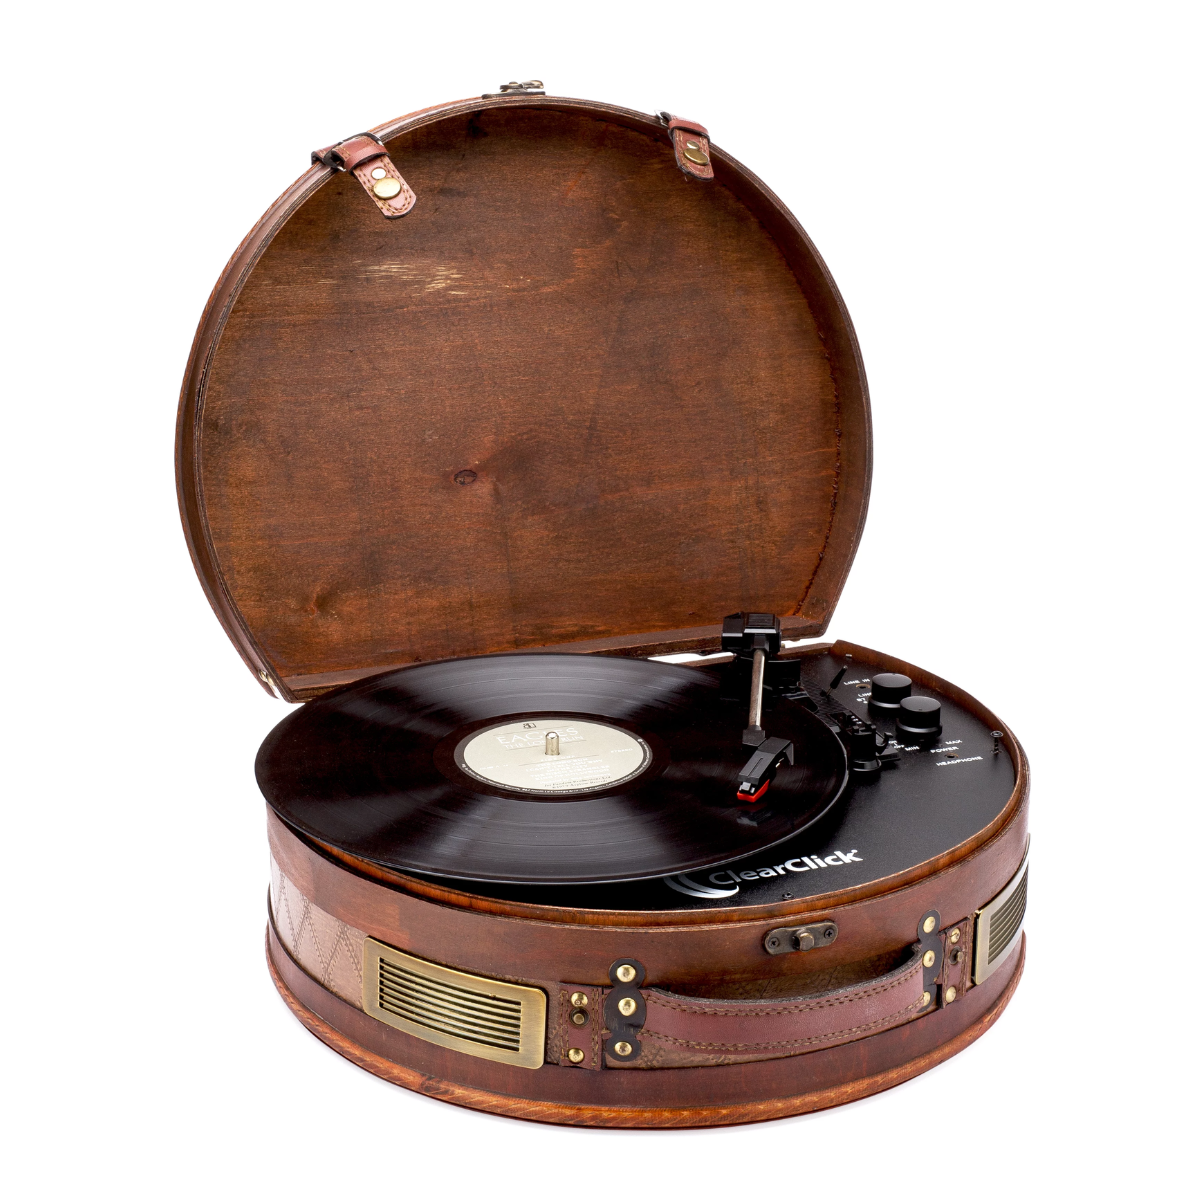 27. Vintage-Inspired Record Player: A Unique and Thoughtful Anniversary Gift for Him